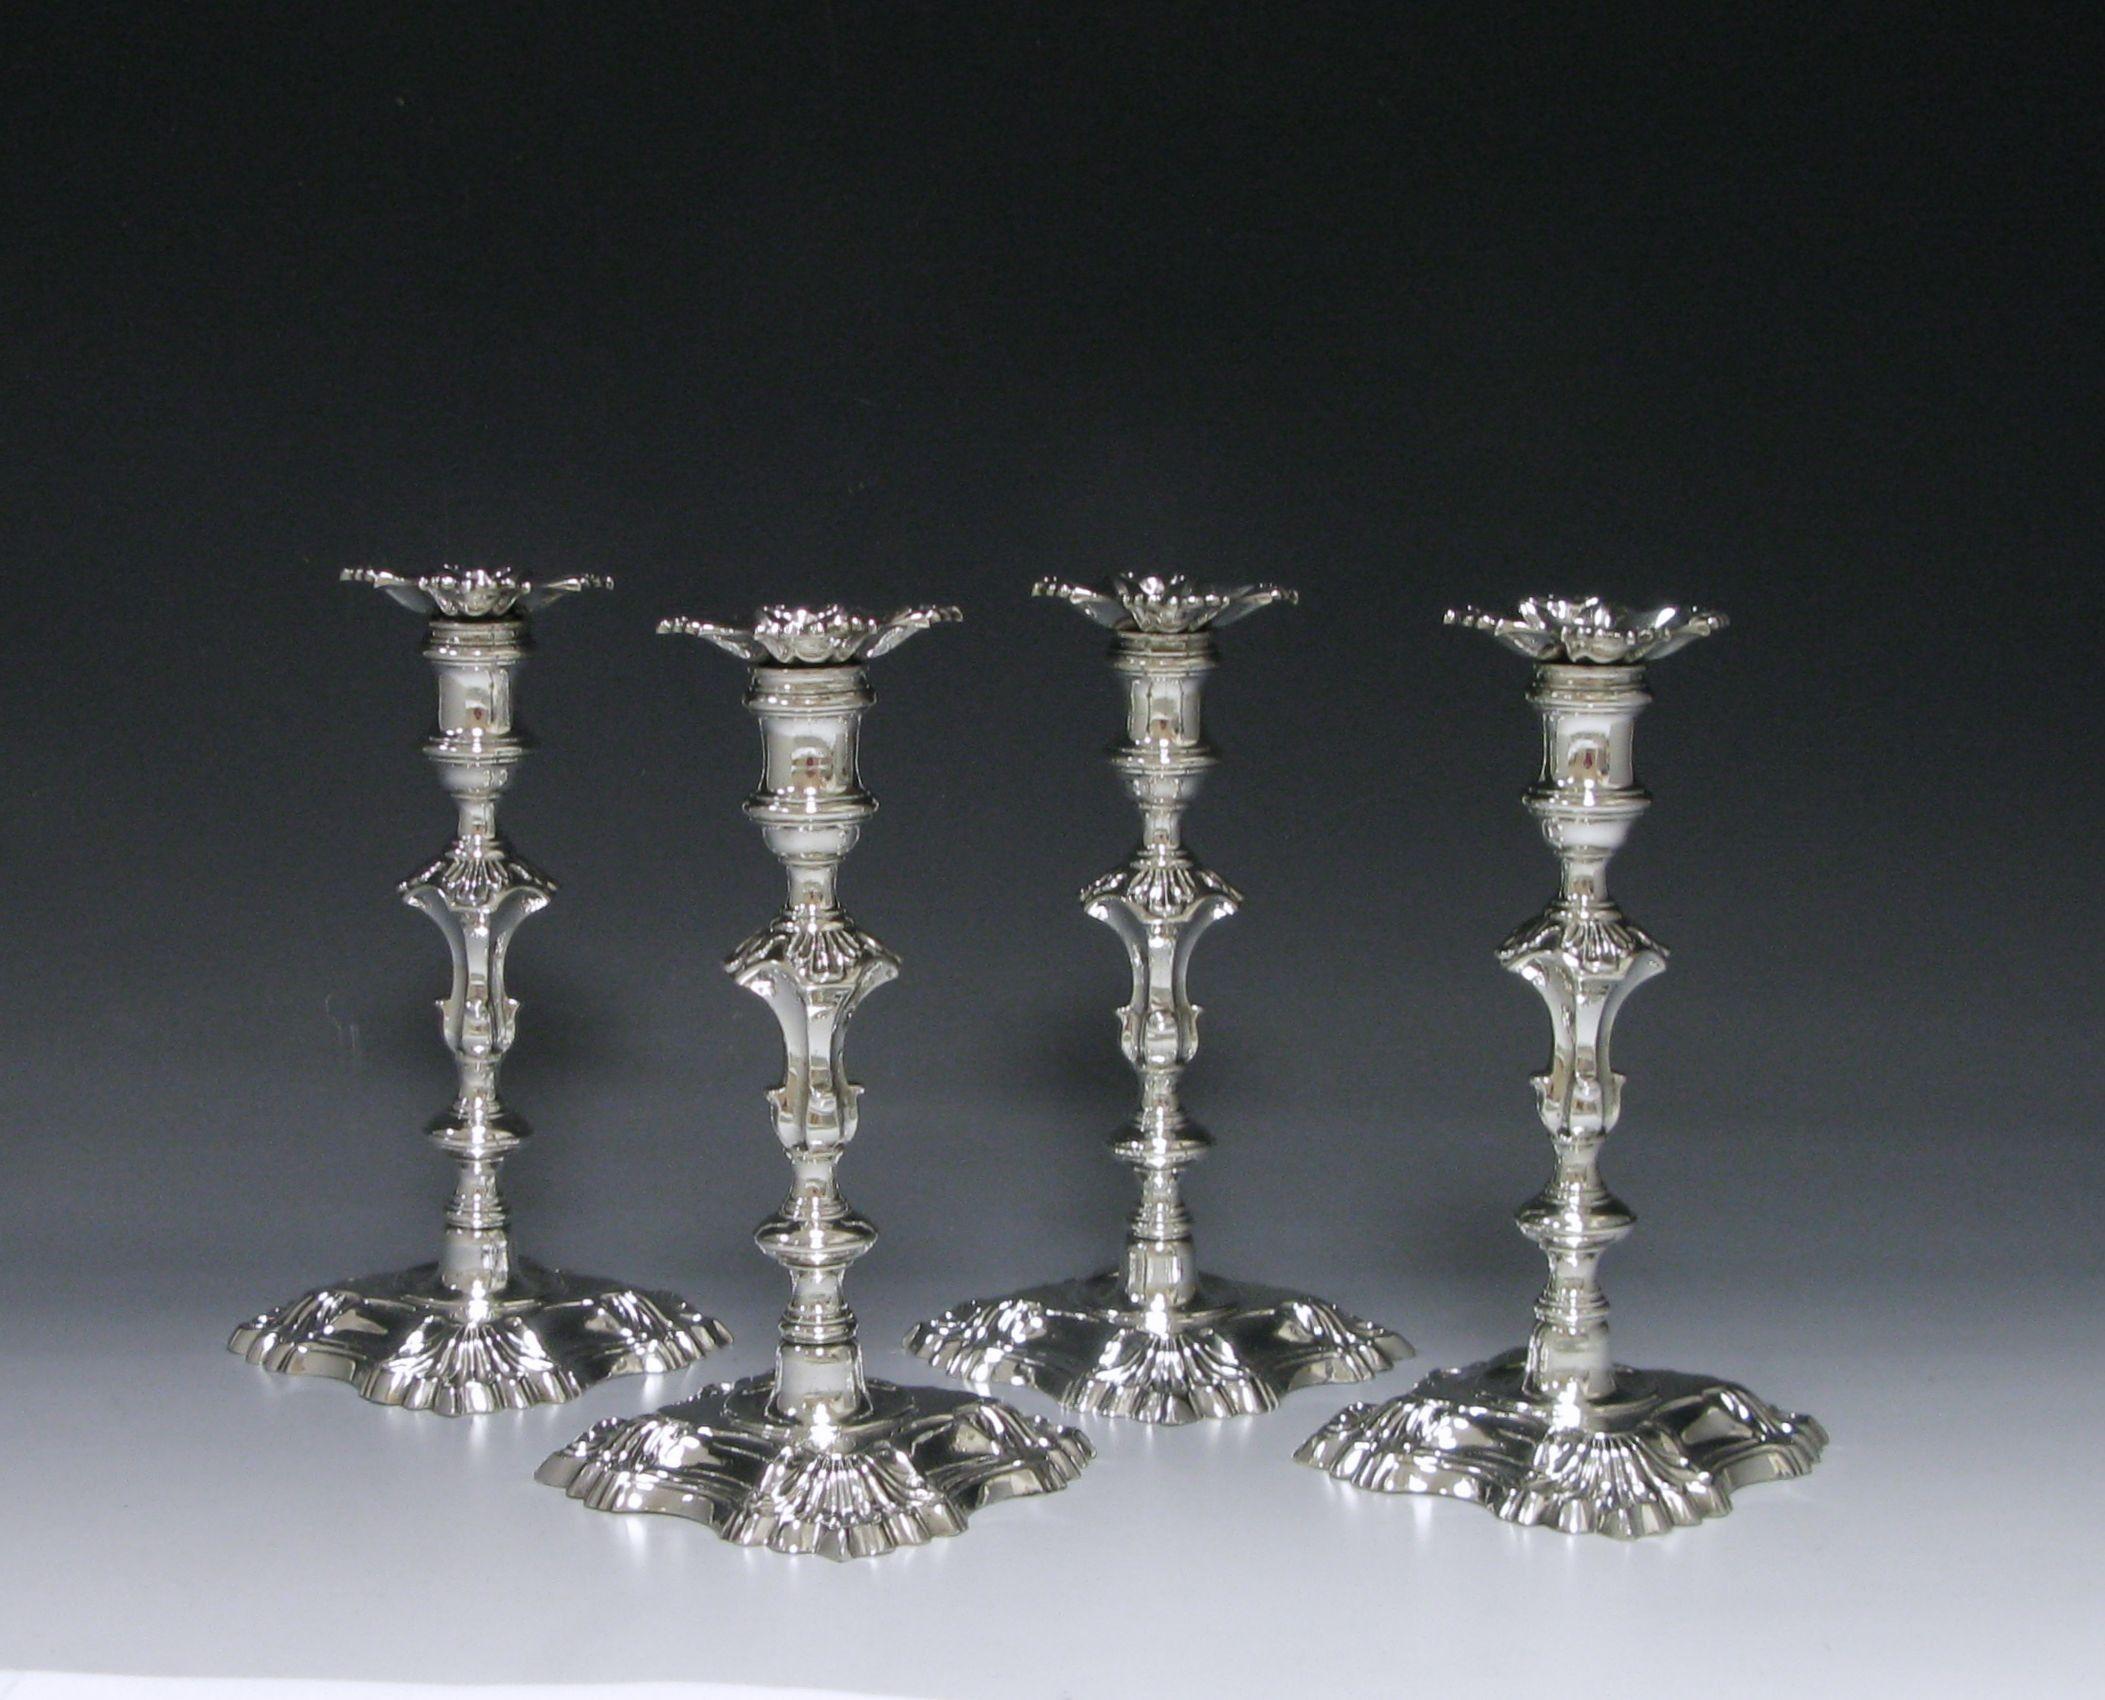 A superb set of George II antique silver cast candlesticks. The knopped baluster formed stems lead to reeded spool shaped sconces tapering to acanthus embellished shoulders. The conventional formed nozzles are detachable, lobed shaped and